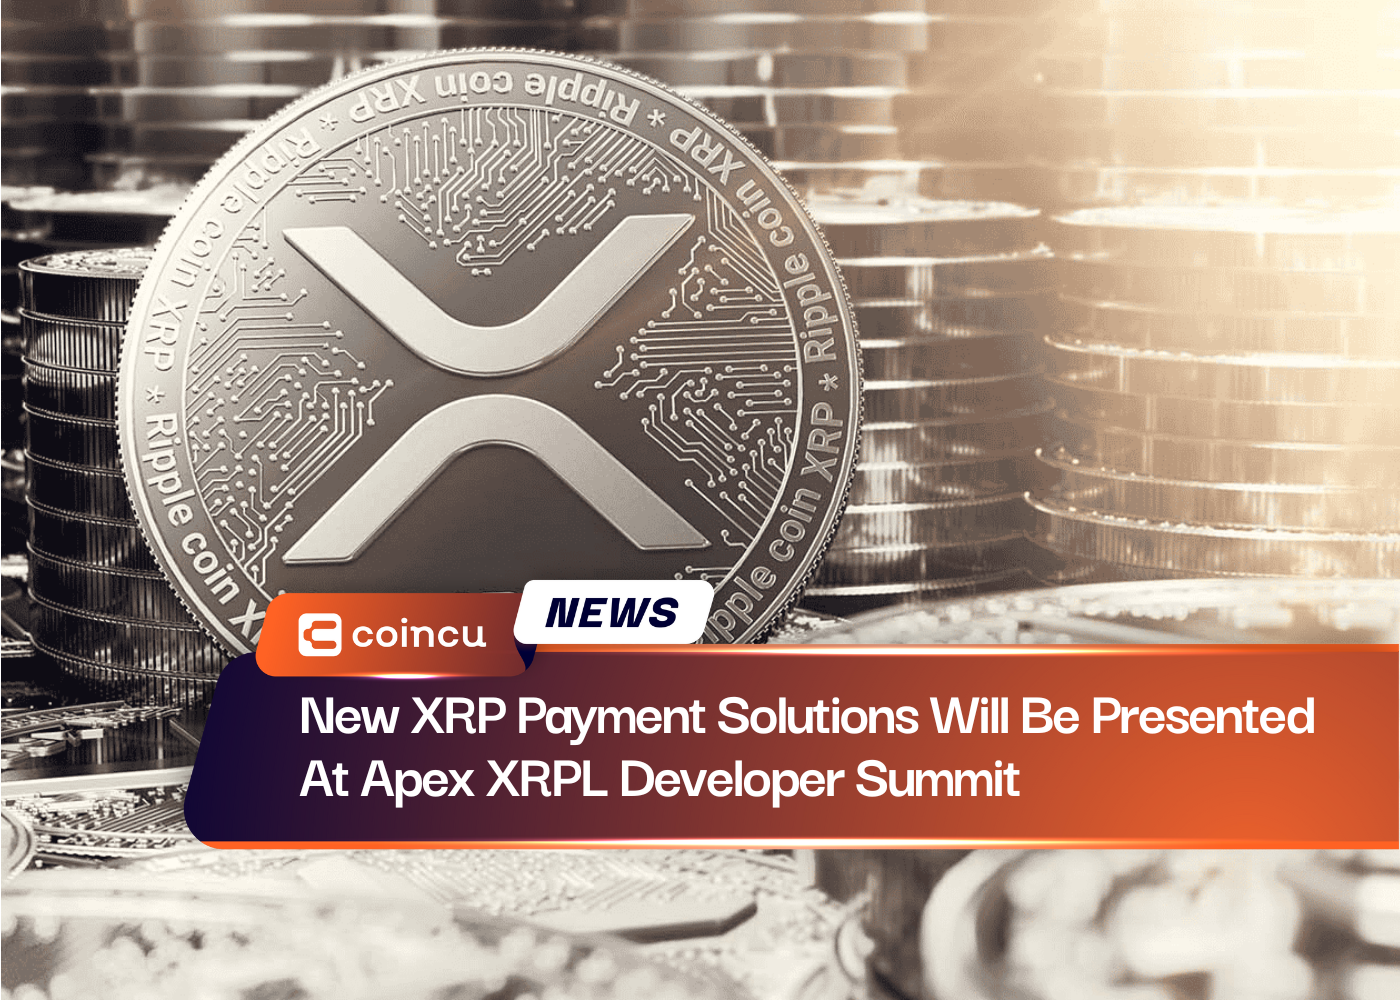 New XRP Payment Solutions Will Be Presented At Apex XRPL Developer Summit